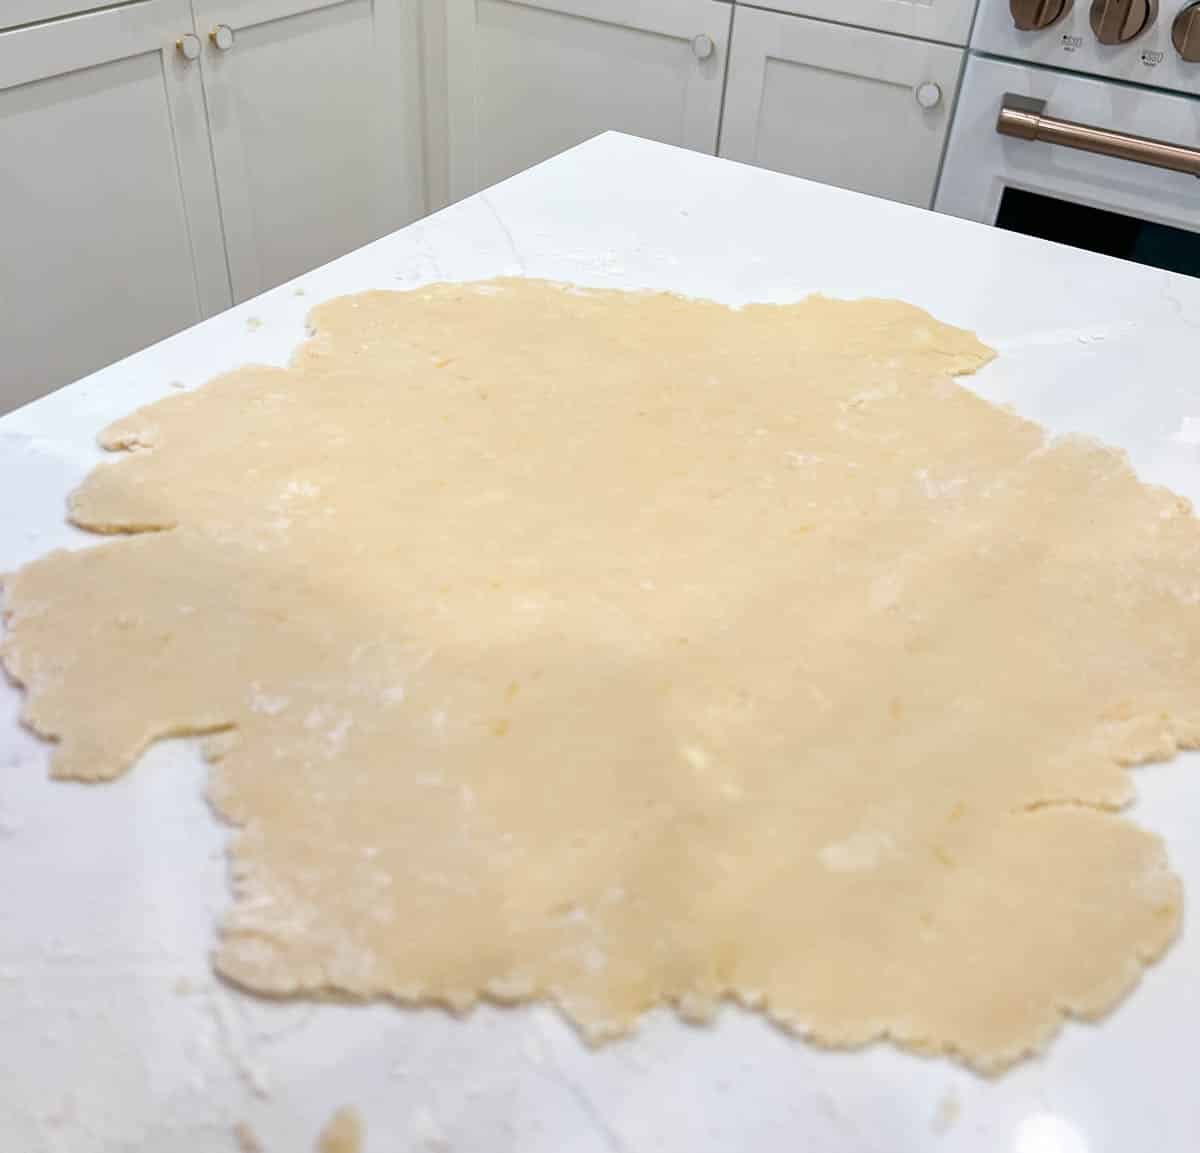 tart dough rolled out on a kitchen counter